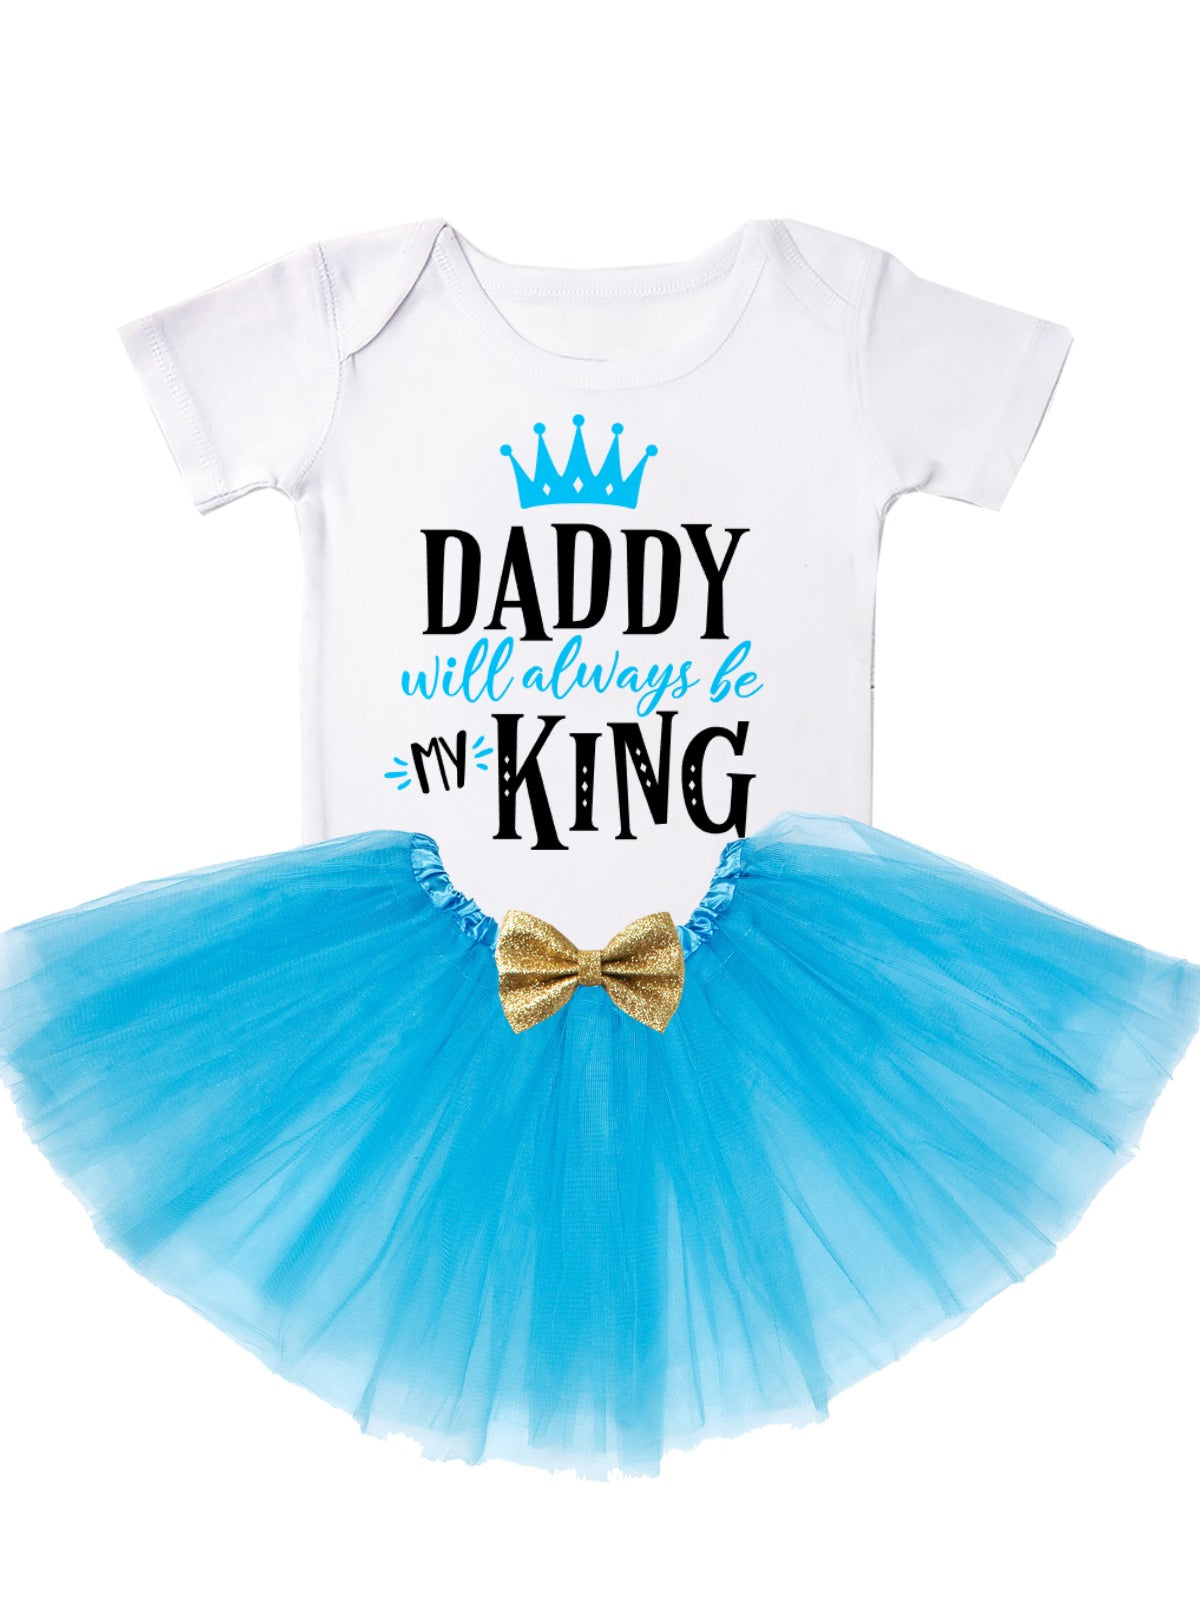 Daddy will always be my king girl's tutu outfit in blue